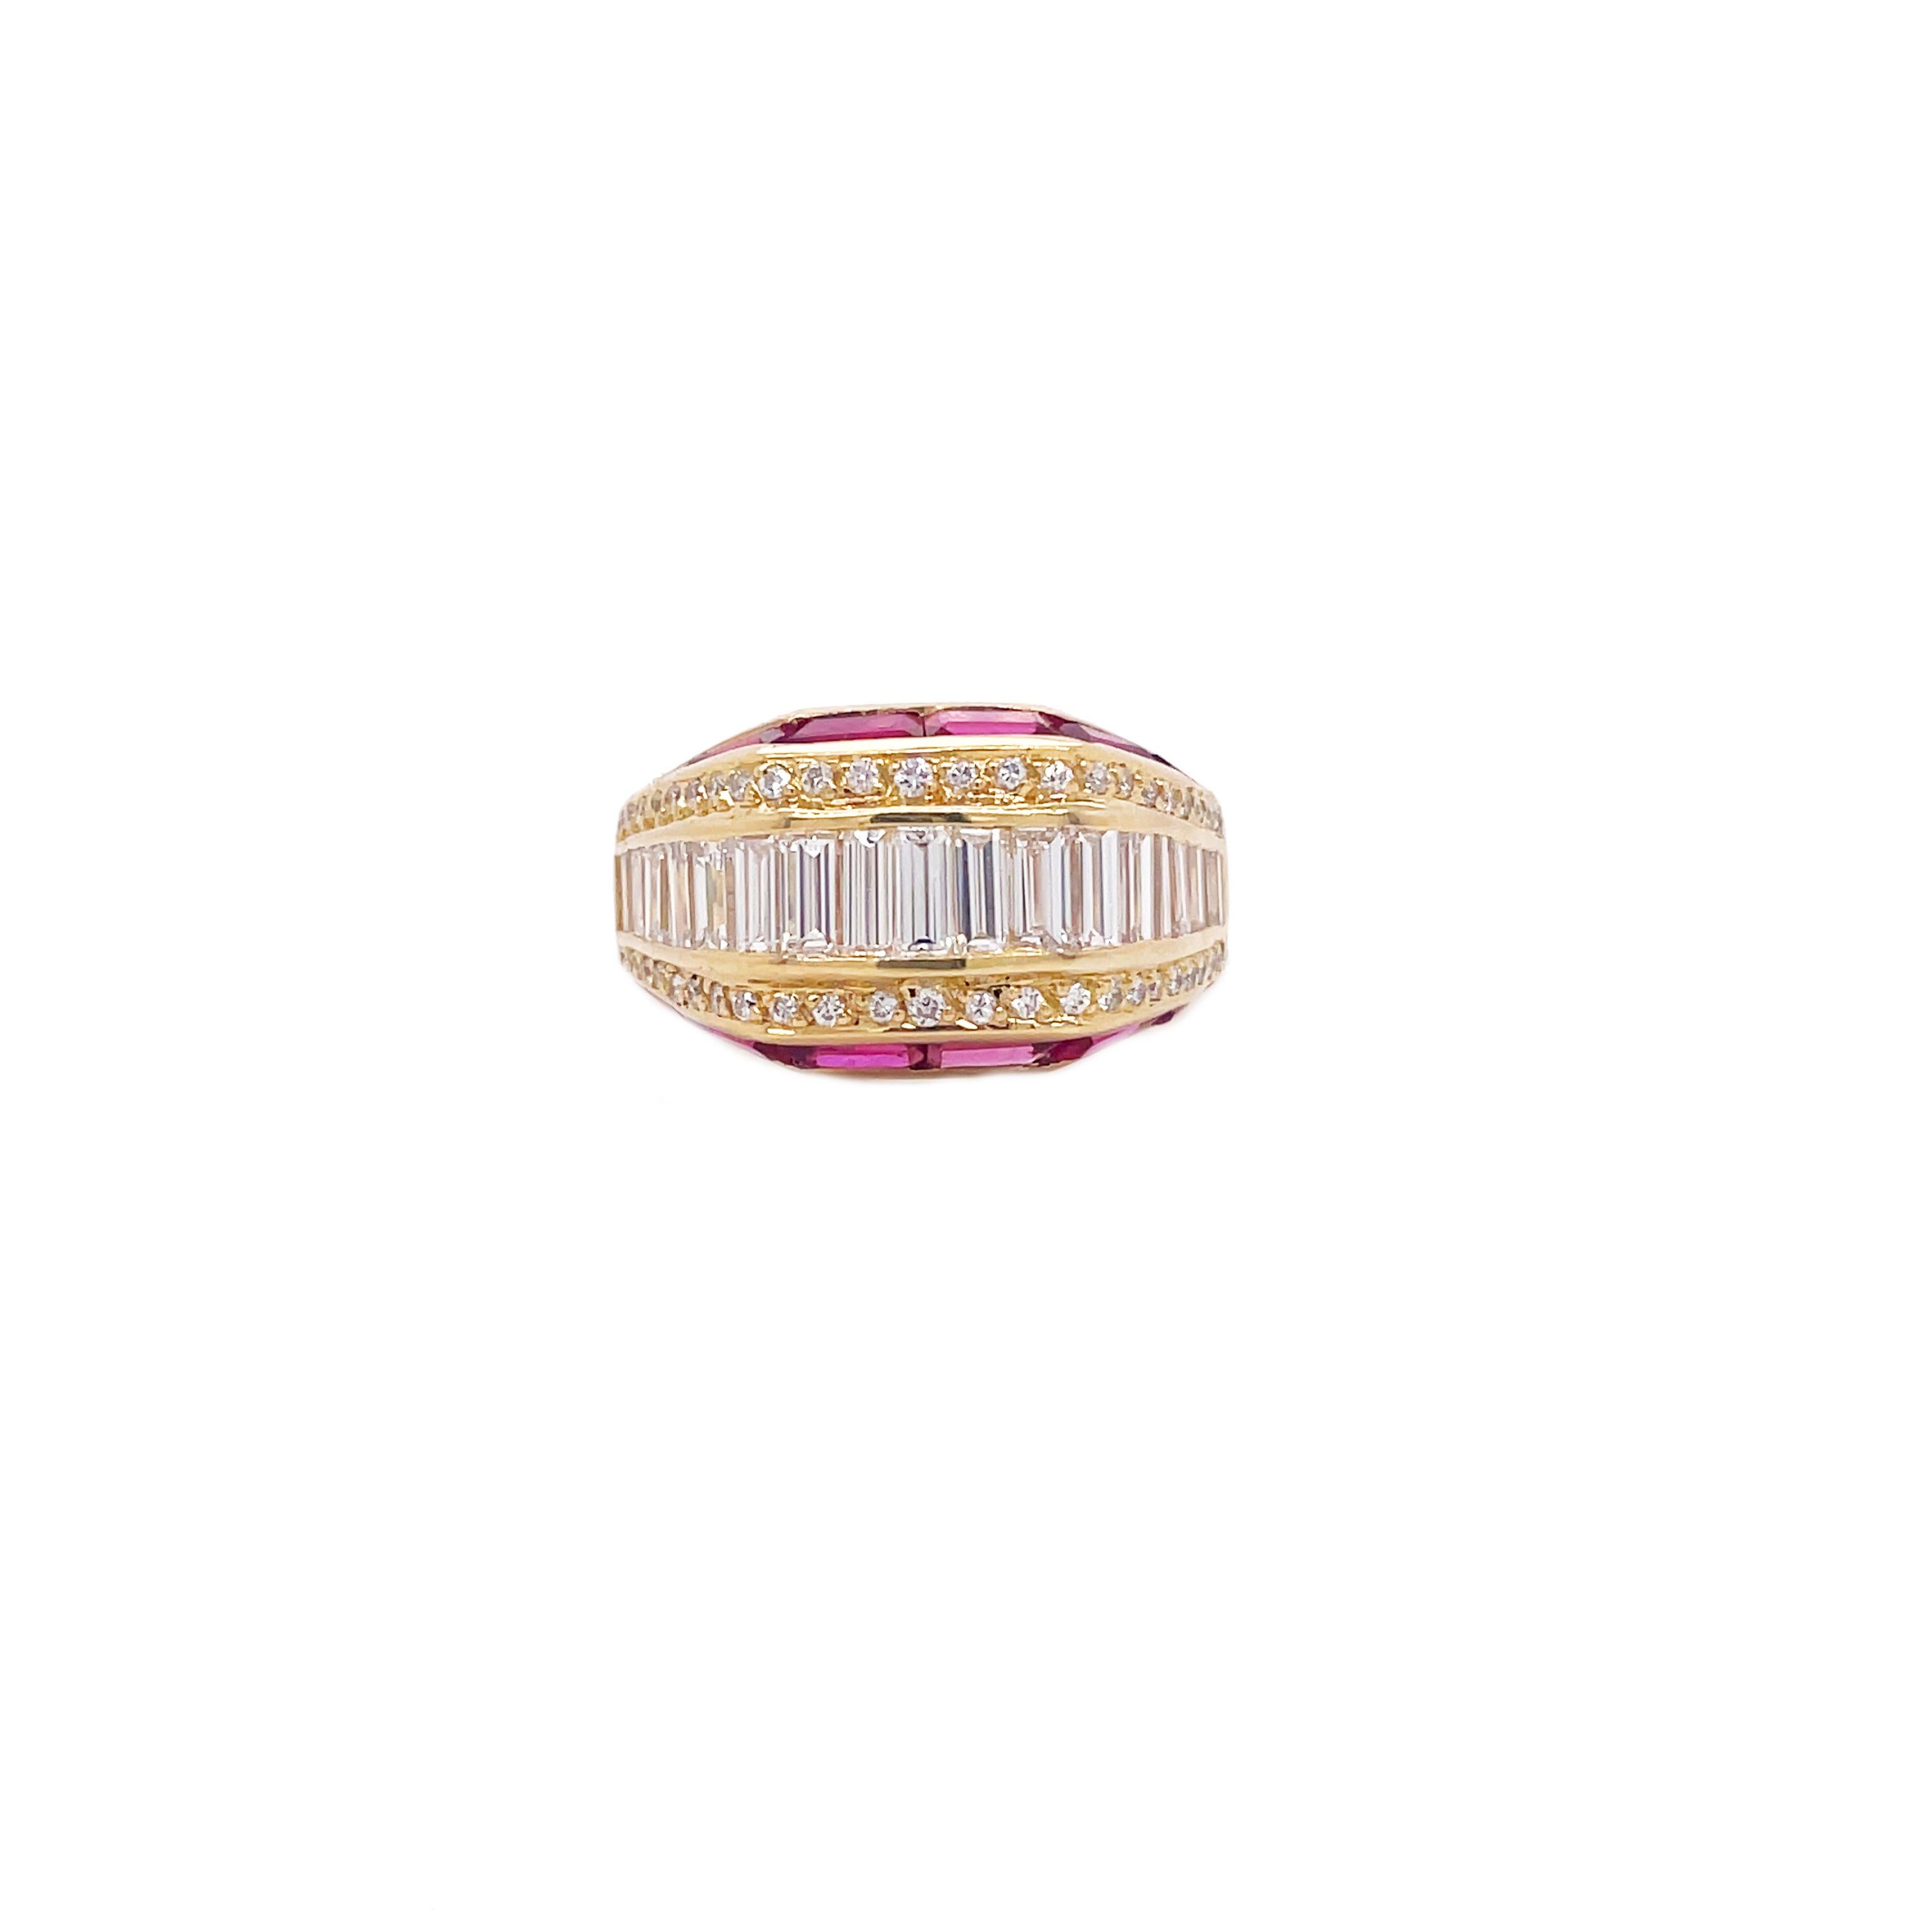 This is a breathtaking 1960s 18K yellow gold ring that features bright white baguette diamonds and stunning vibrant rubies. The shining baguette diamonds cascade down the ring like a waterfall, complemented by the vibrant and rich rubies tapered at